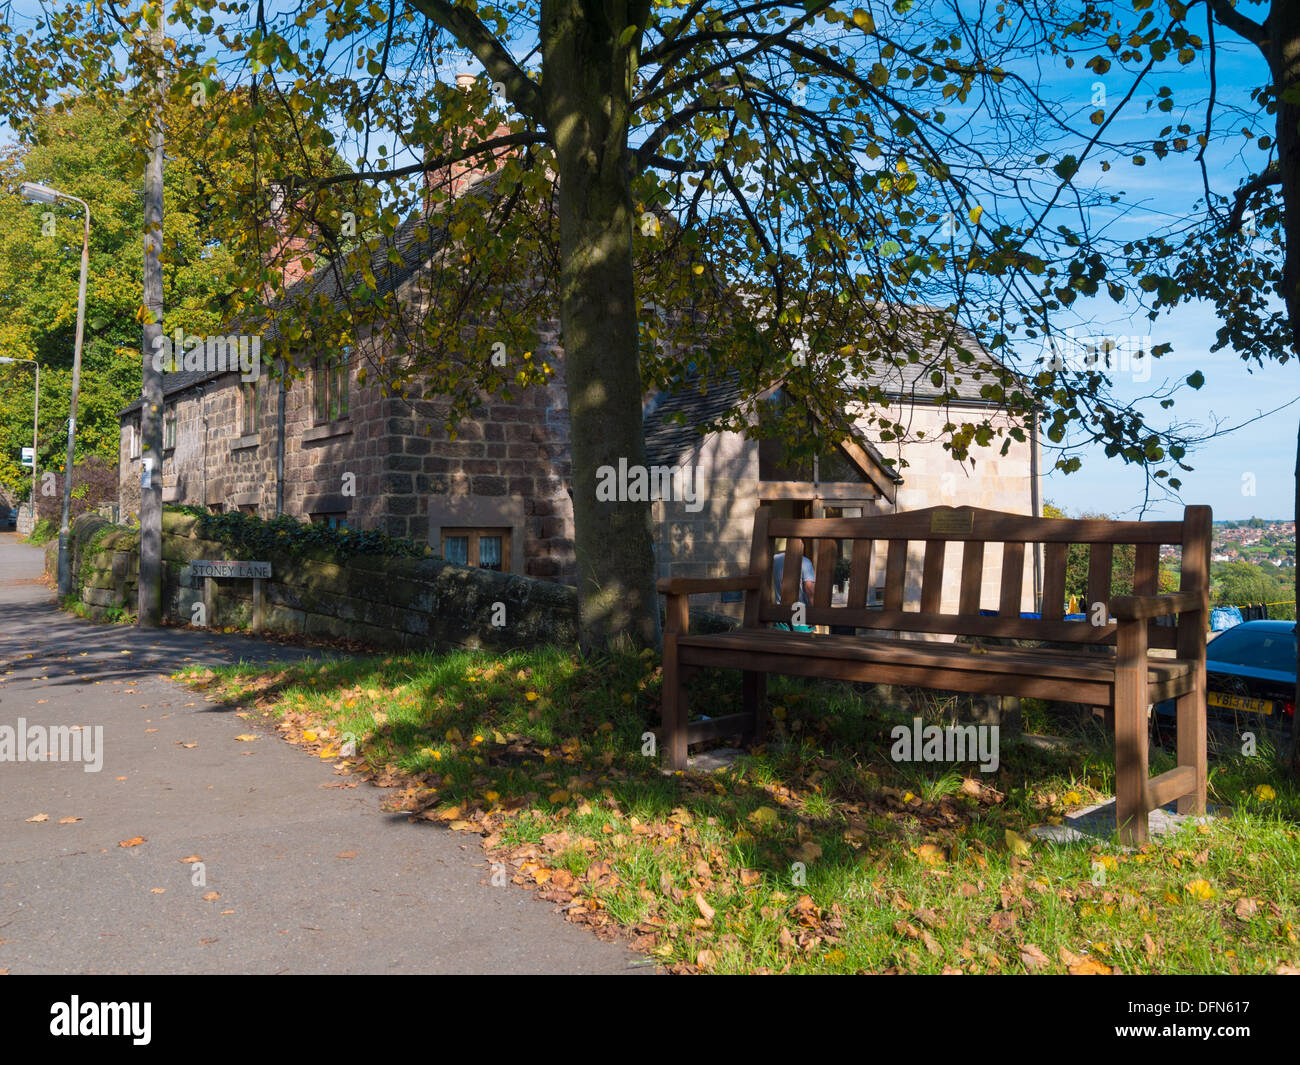 Wooden Bench next to a tree in the village of Holbrook, Derbyshire, United Kingdom. Stock Photo